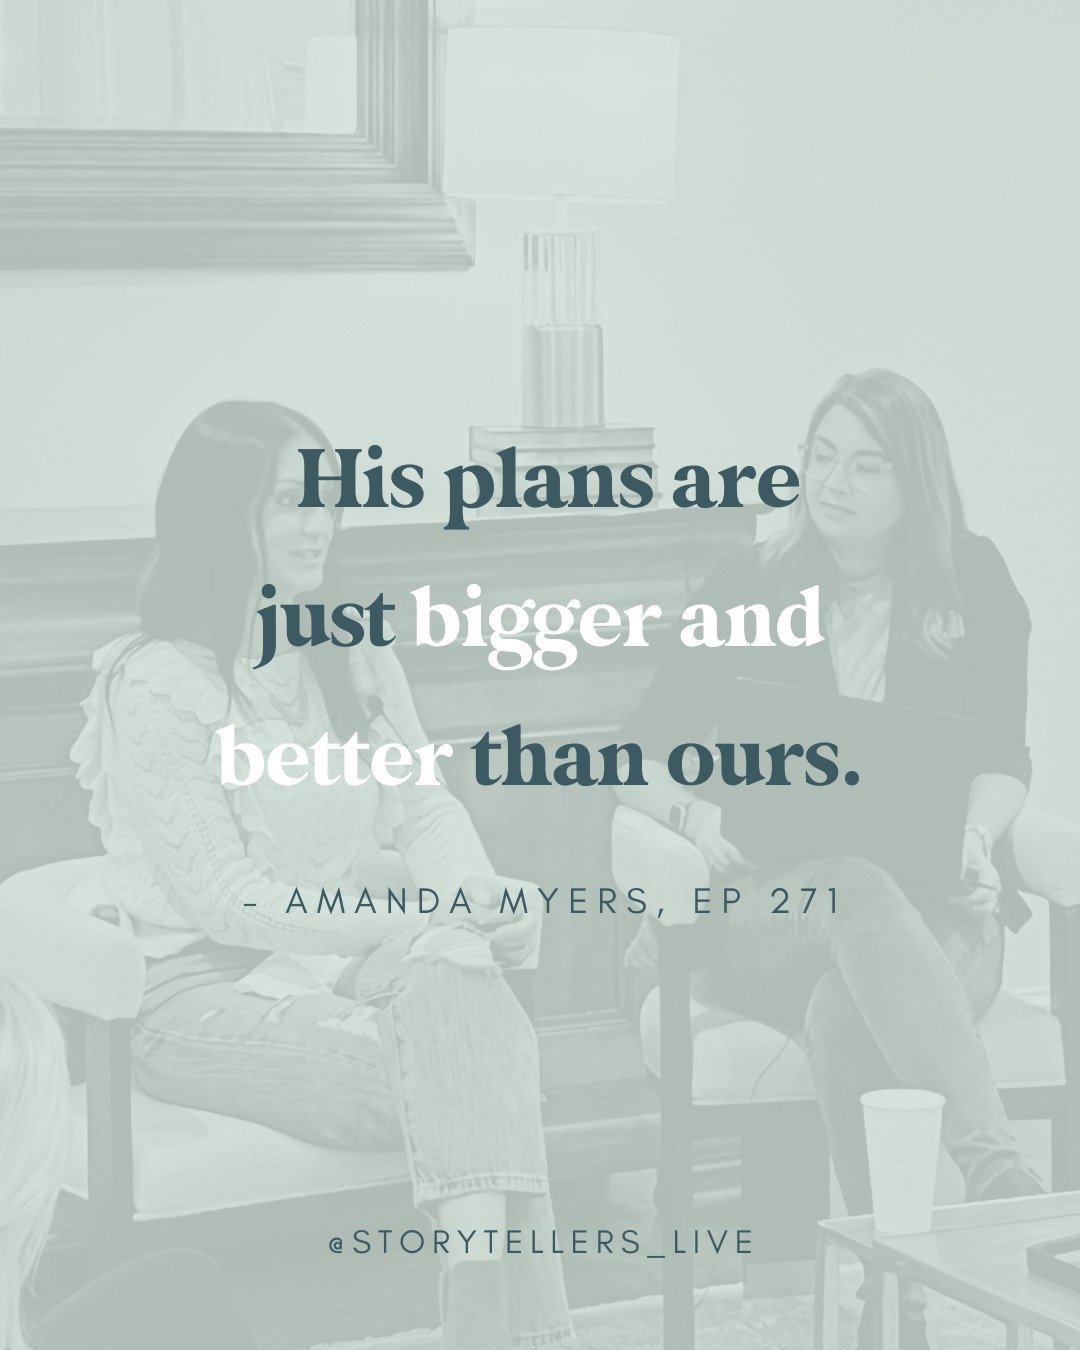 God's plans are not your plans&mdash;they're better. ⁠
⁠
When Amanda Myers felt called to adopt a little girl from Guatemala, she would have never expected God wouldn't allow that to happen. But now she sees the good in the direction God took her and